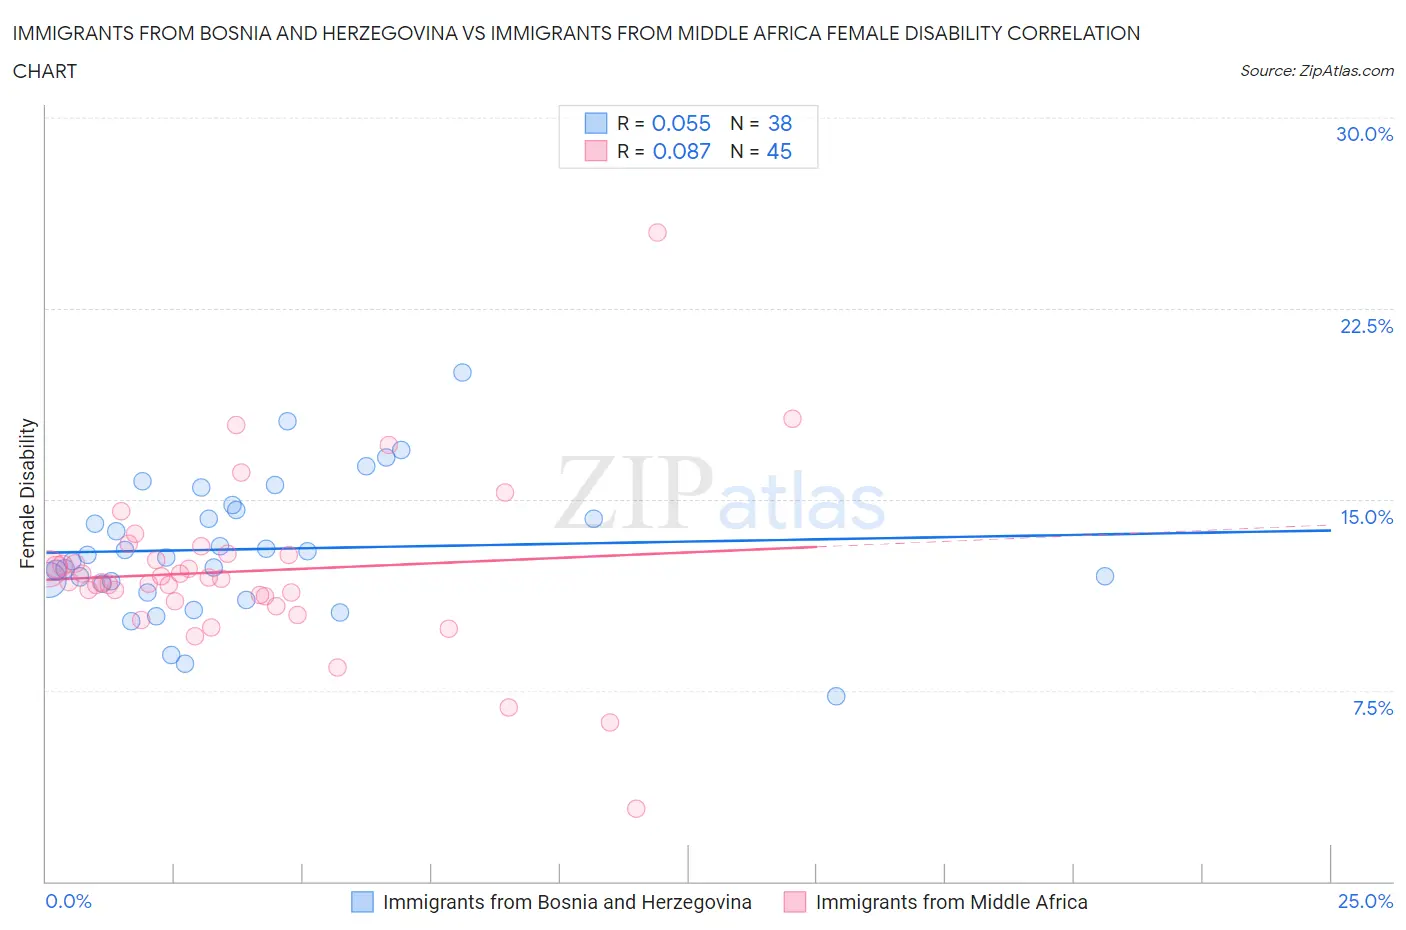 Immigrants from Bosnia and Herzegovina vs Immigrants from Middle Africa Female Disability